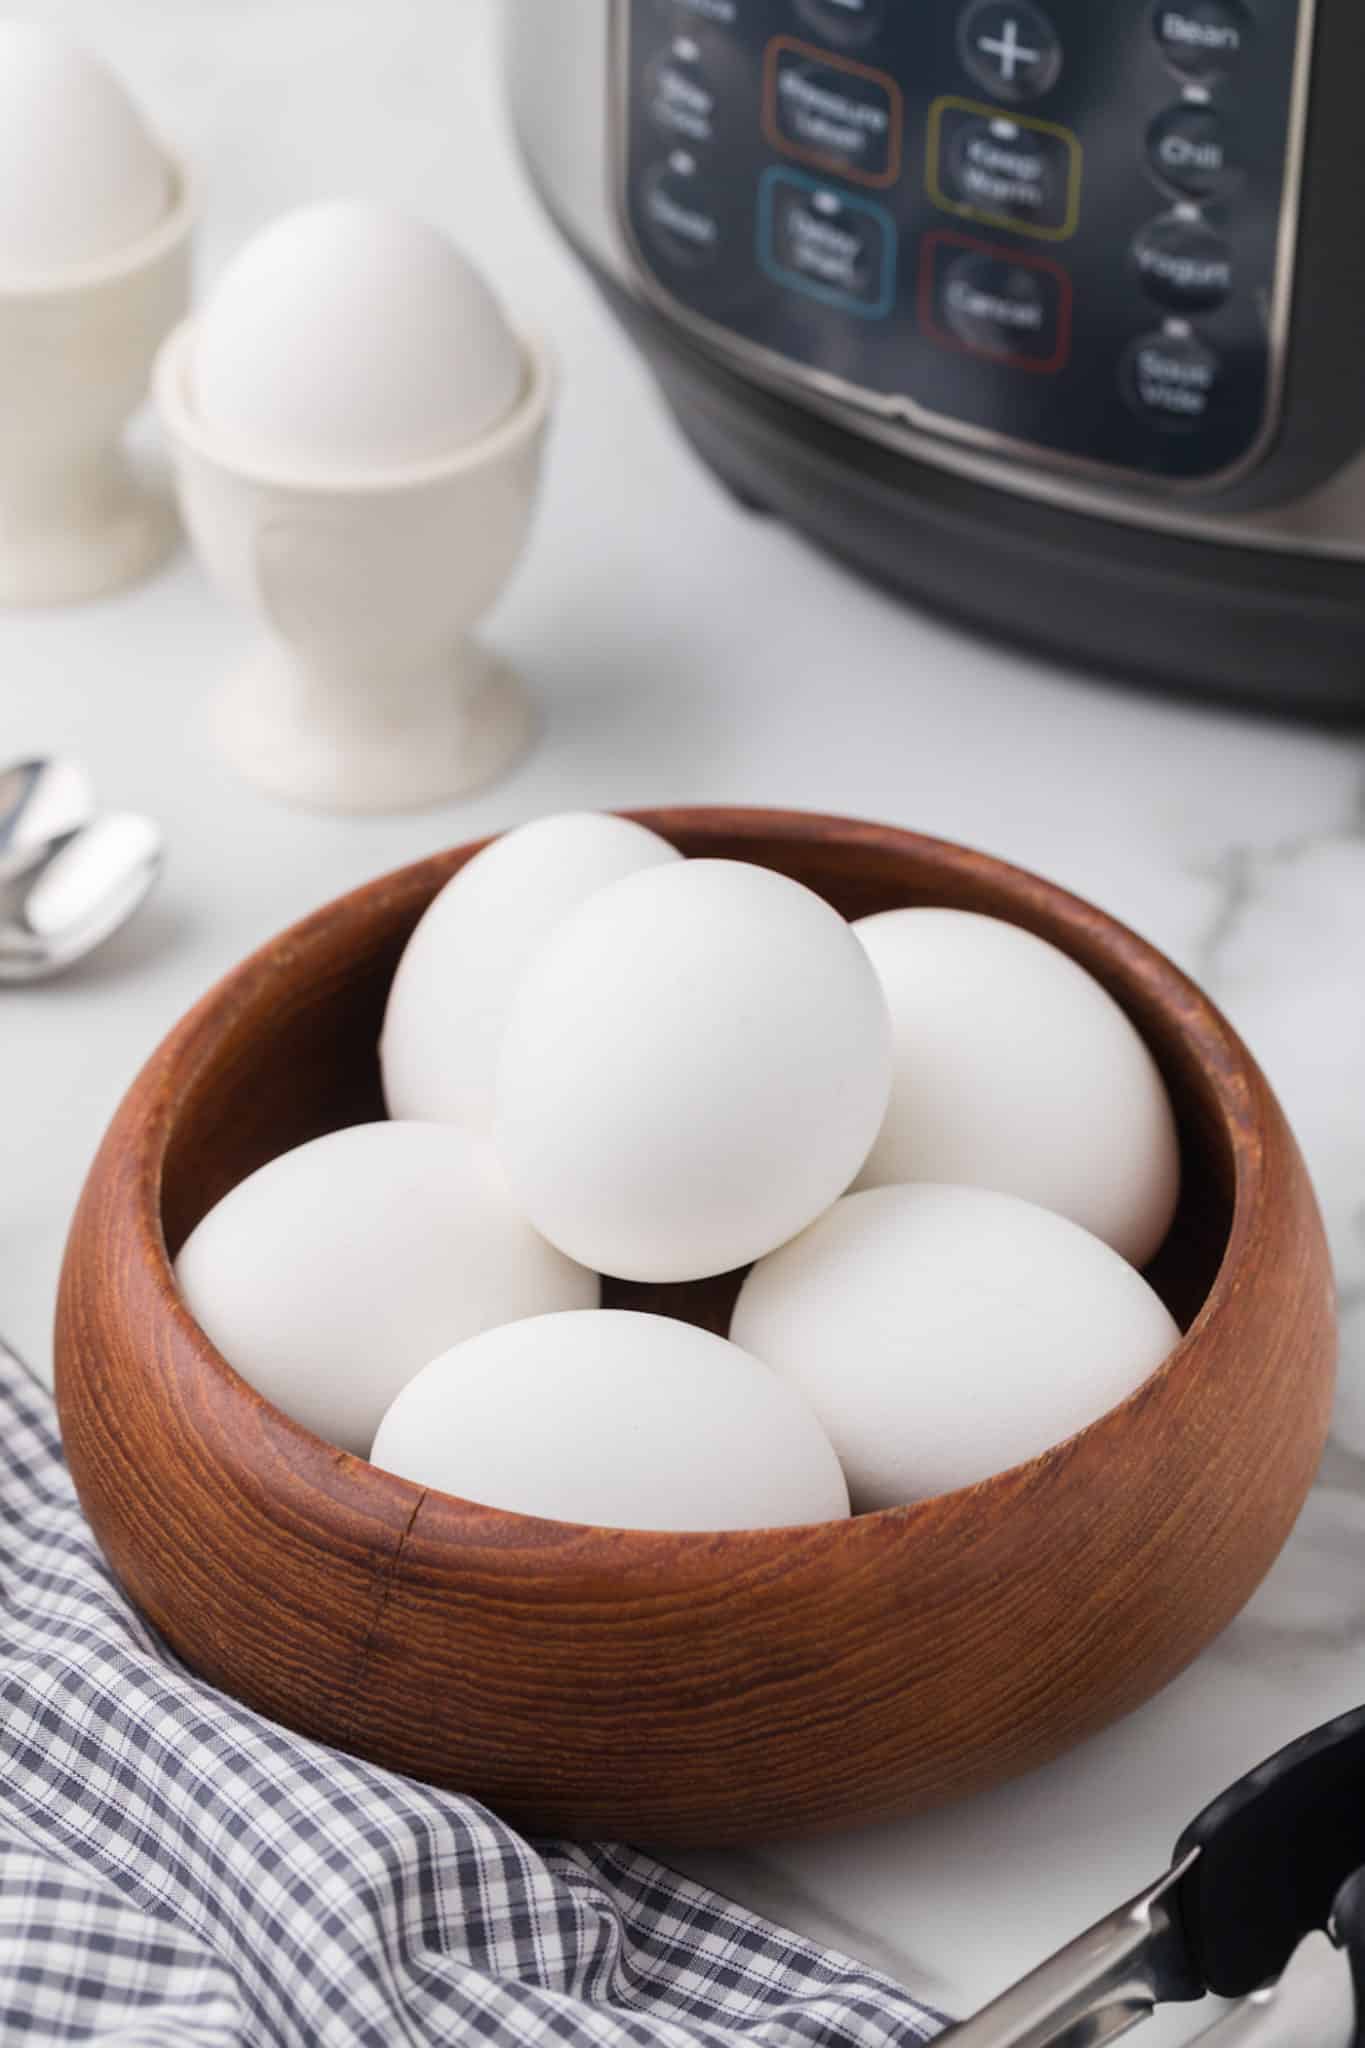 https://www.cleaneatingkitchen.com/wp-content/uploads/2022/01/two-minute-eggs-in-bowl-scaled.jpg